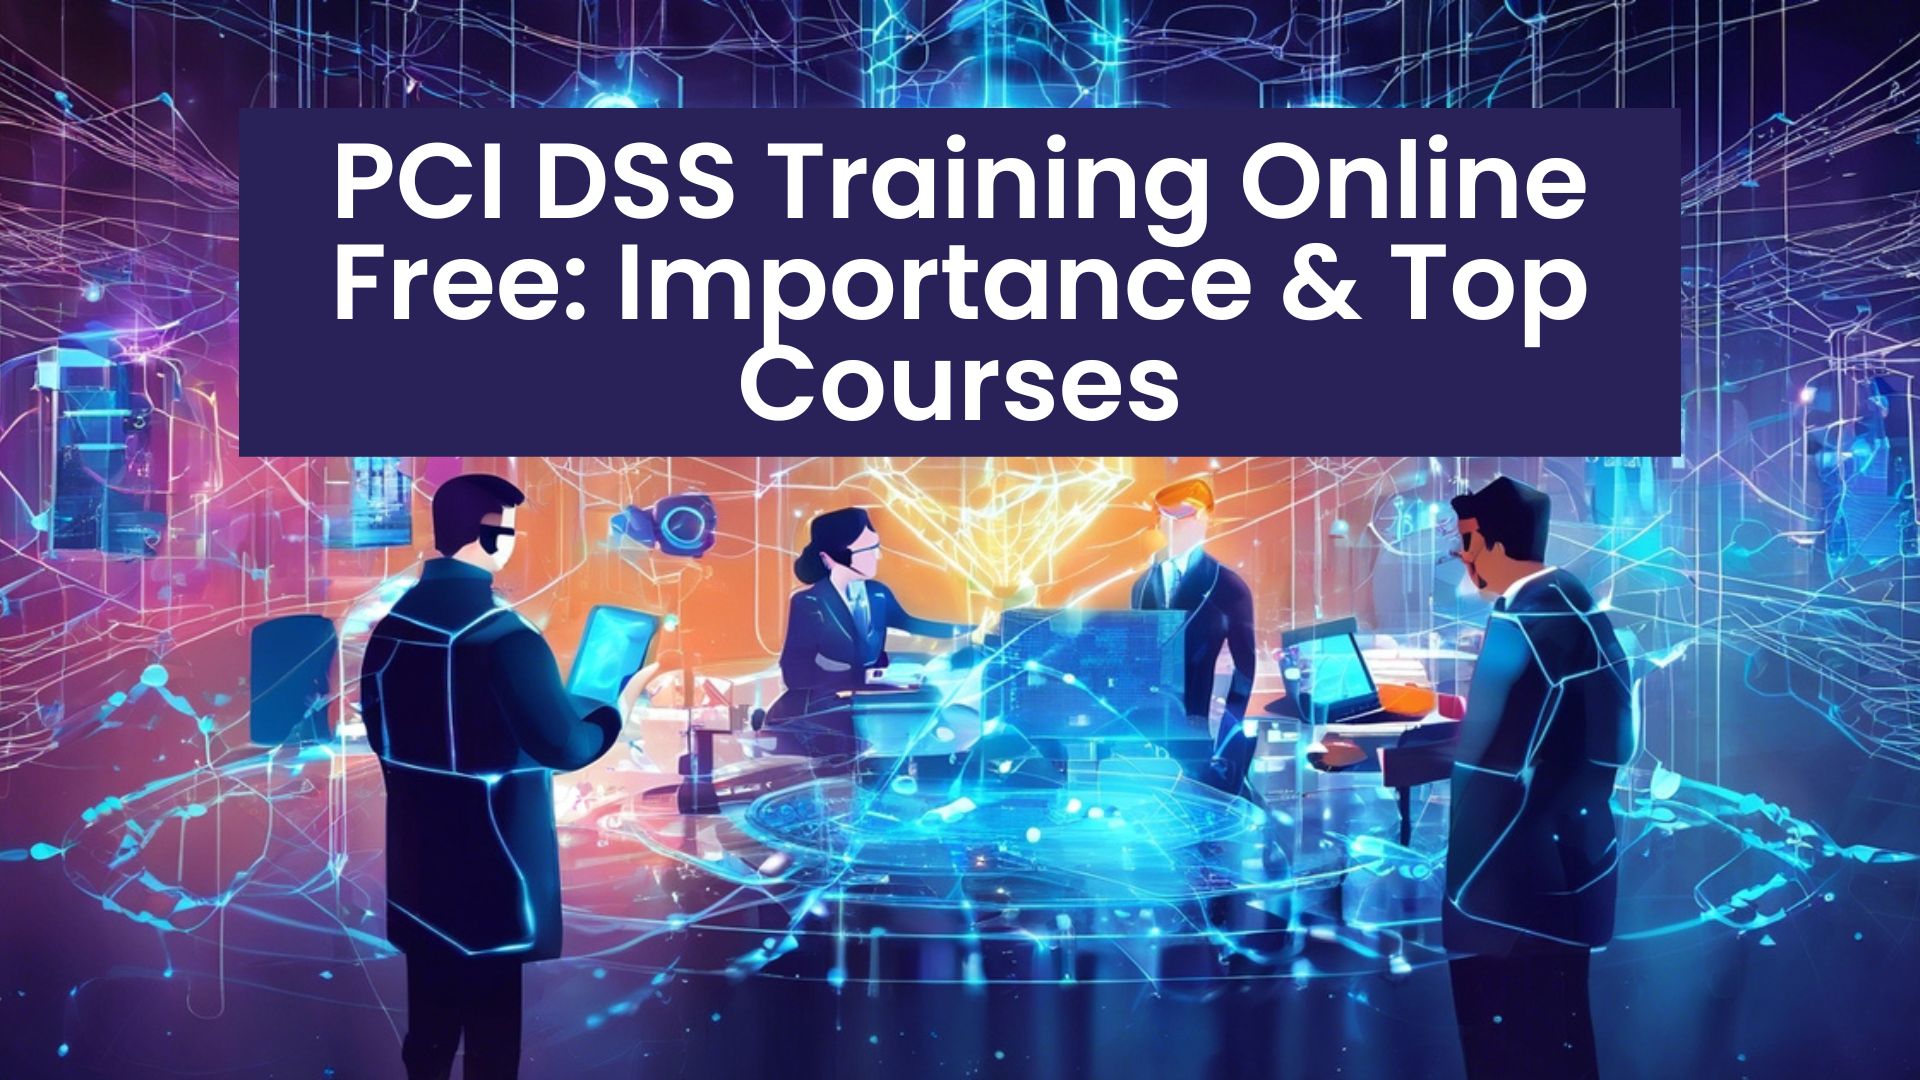 PCI DSS Training Online Free Importance & Top Courses